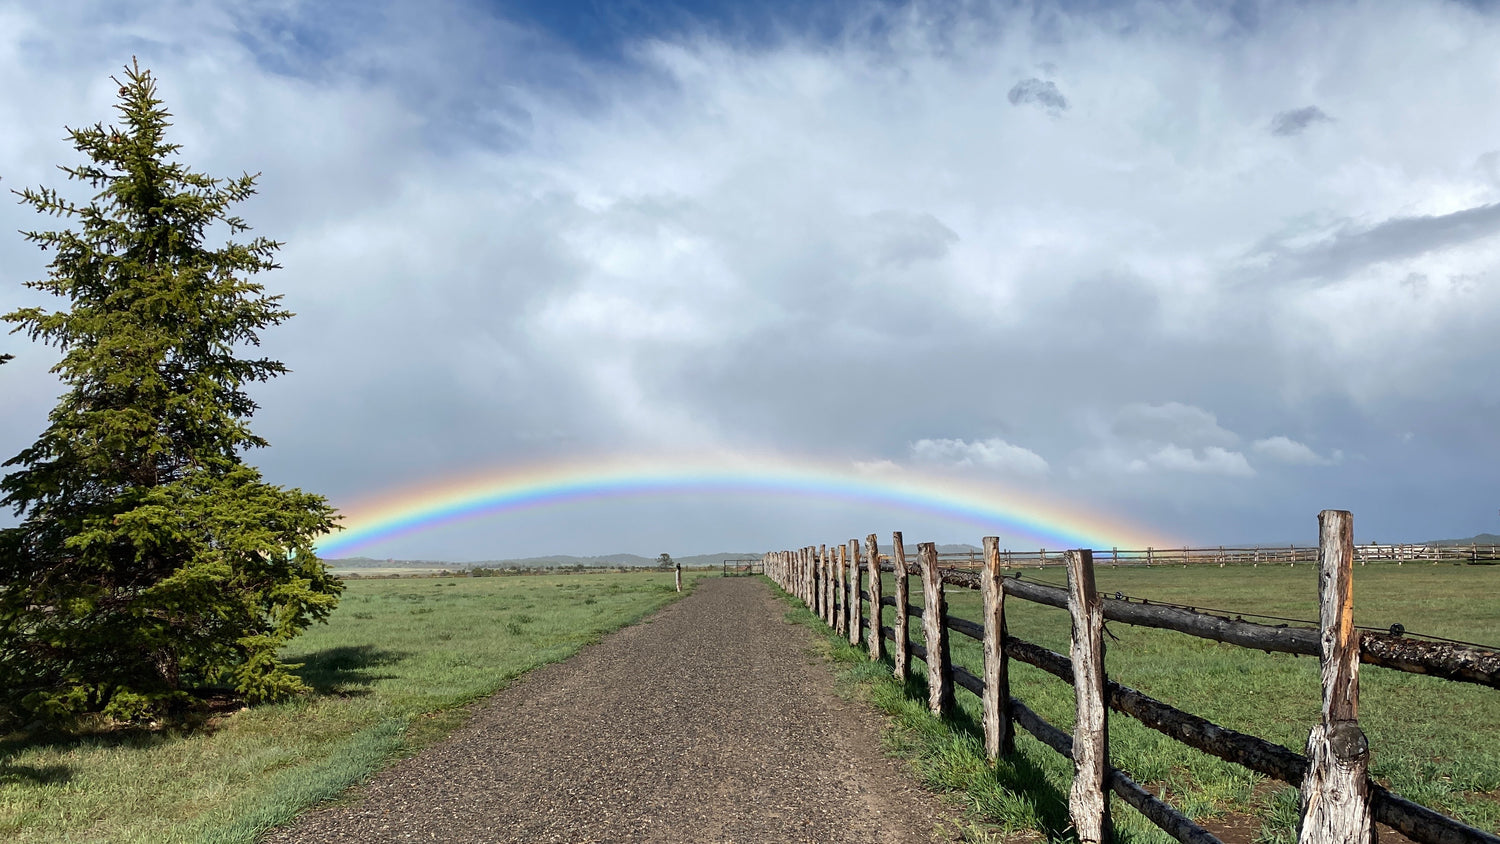 Image of rainbow at the end of a farm road in Telluride, Colorado.  There is a gravel road with a wooden fence that leads into center of photo.  There is a larger pine tree on the left side of image. 